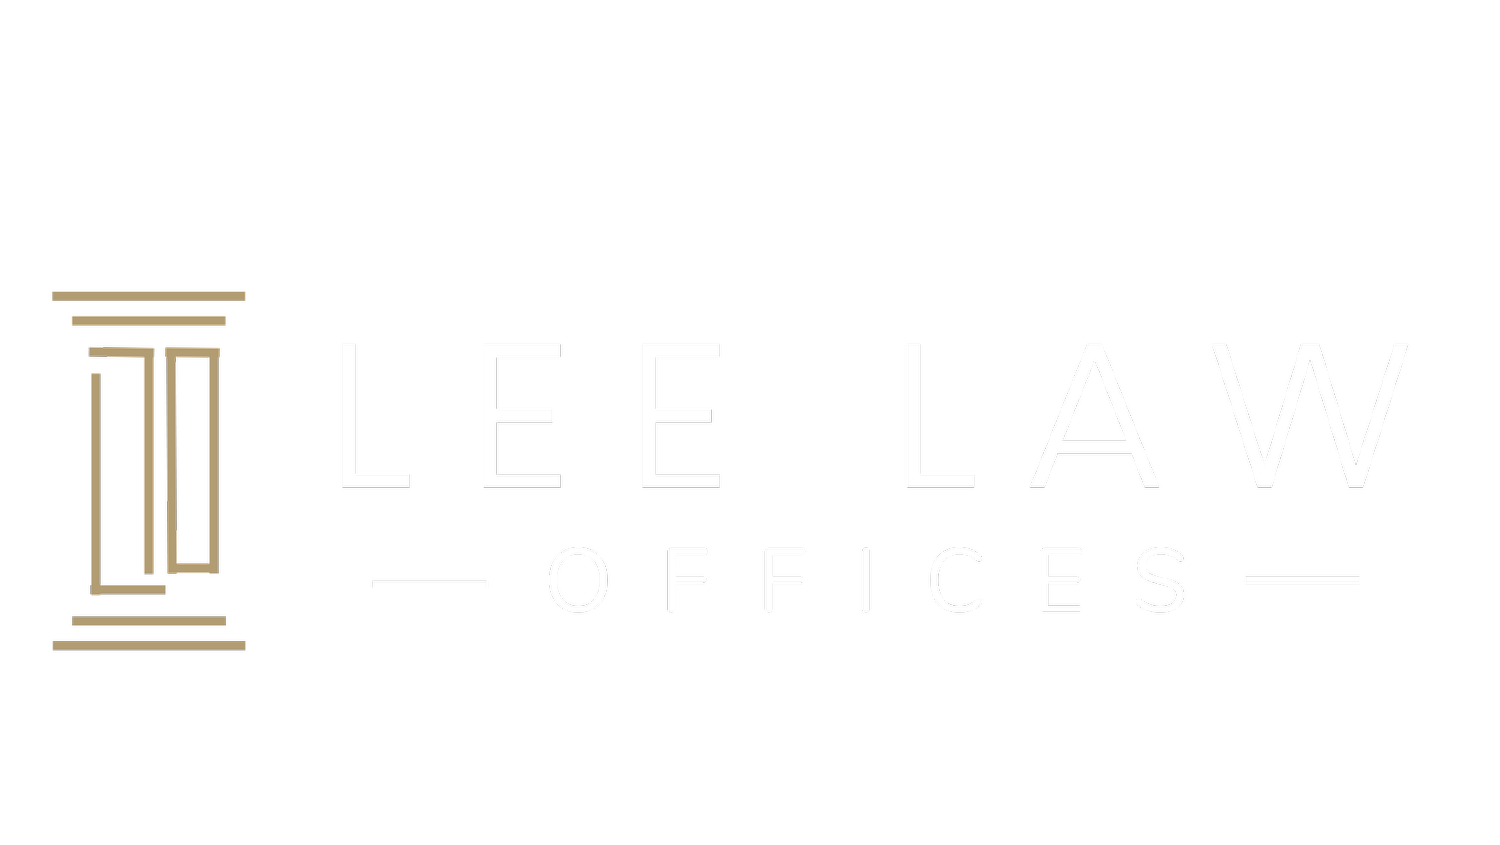 Lee Law Offices